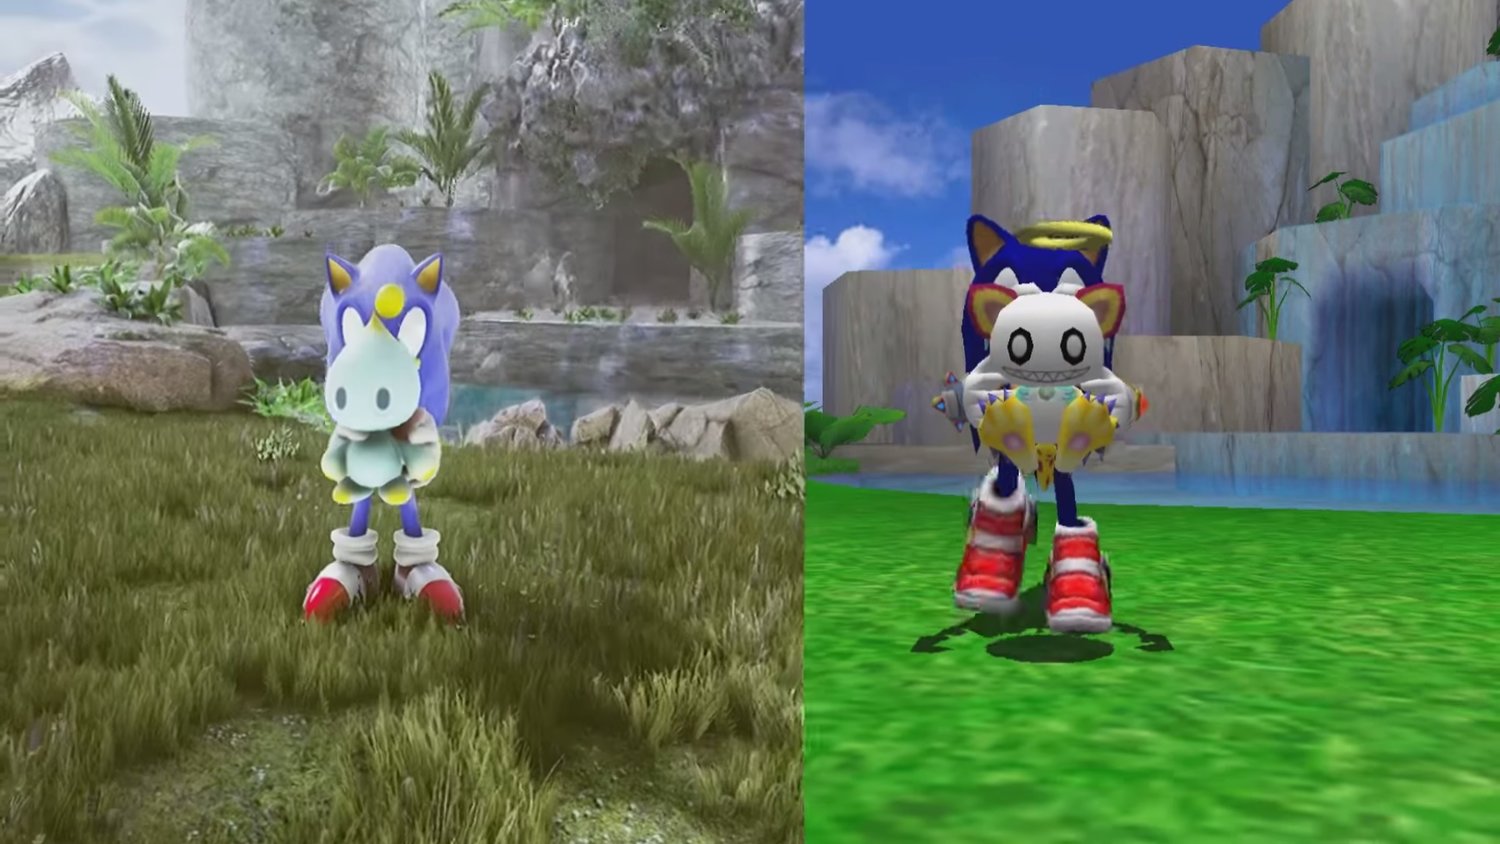 Check Out The Chao From SONIC 2 Remade In UNREAL ENGINE 4 —